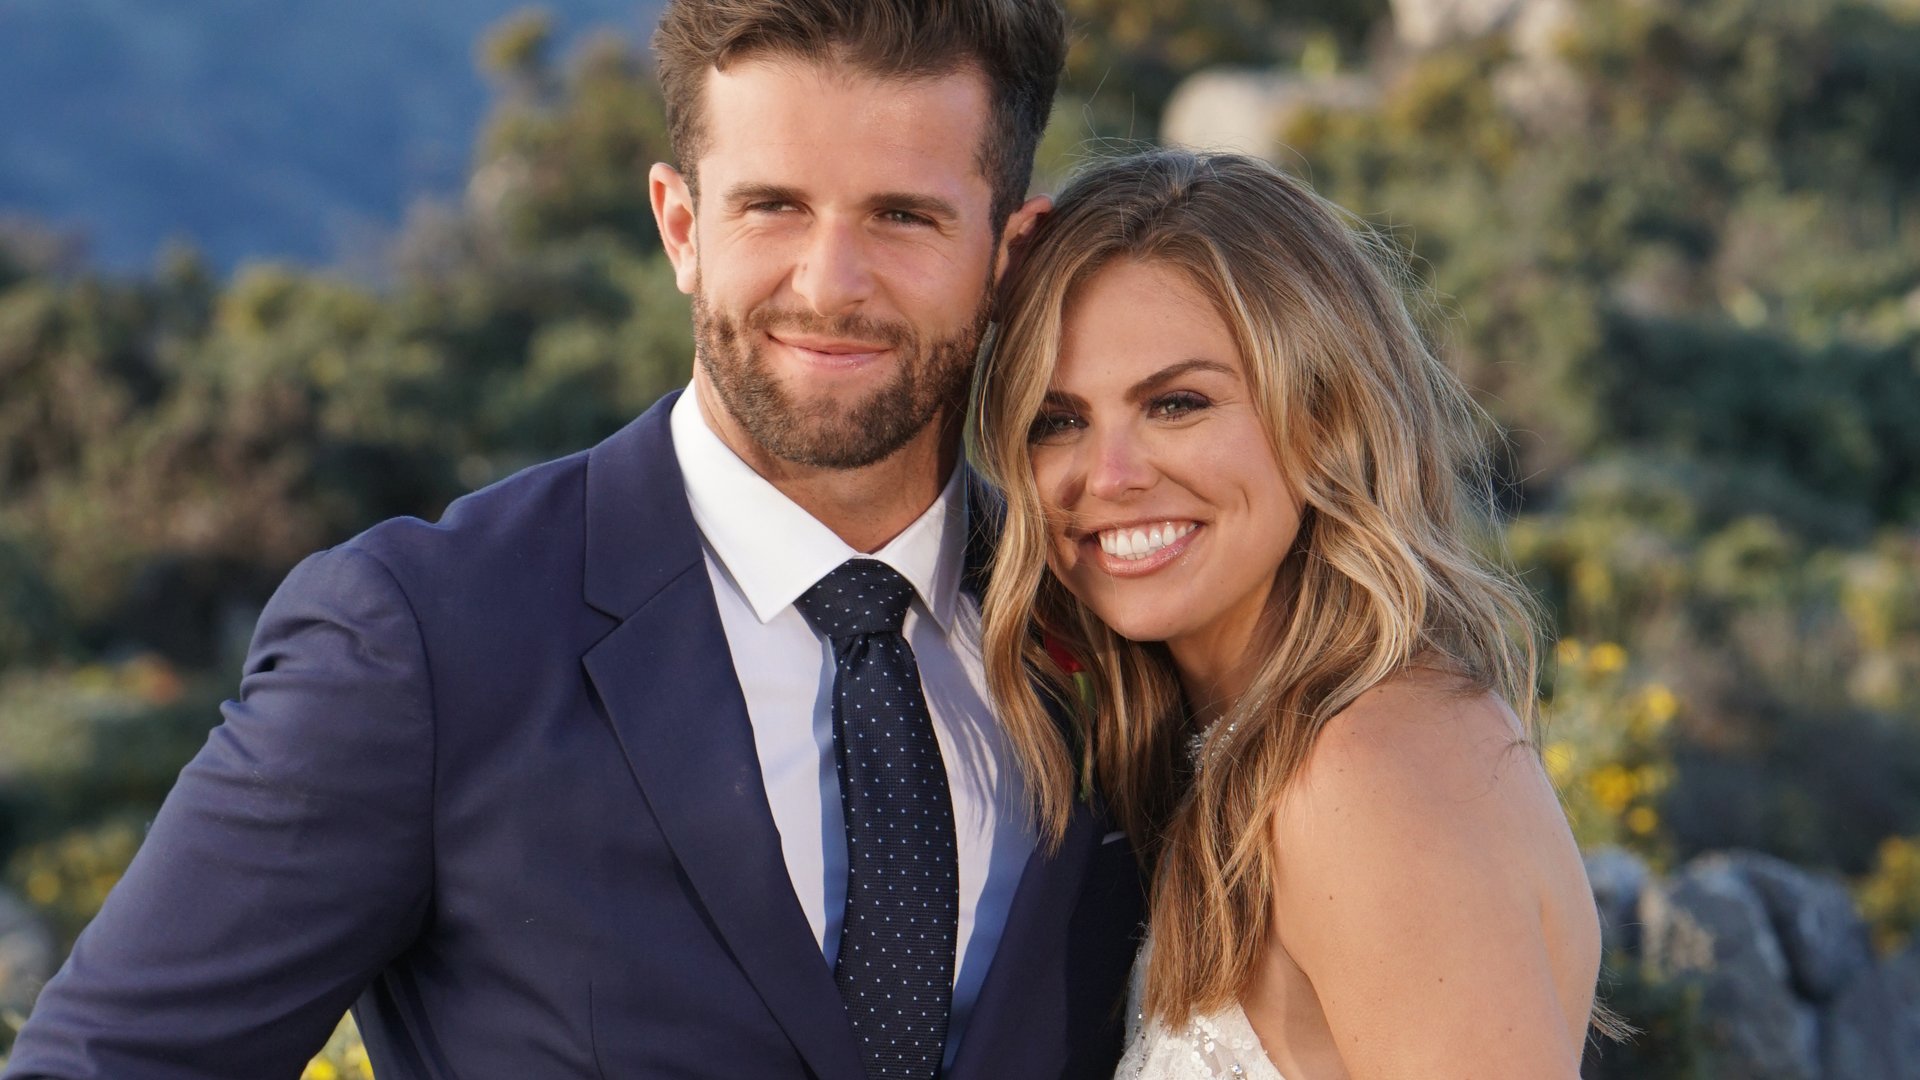 Jed Wyatt and Hannah Brown on 'The Bachelorette' finale